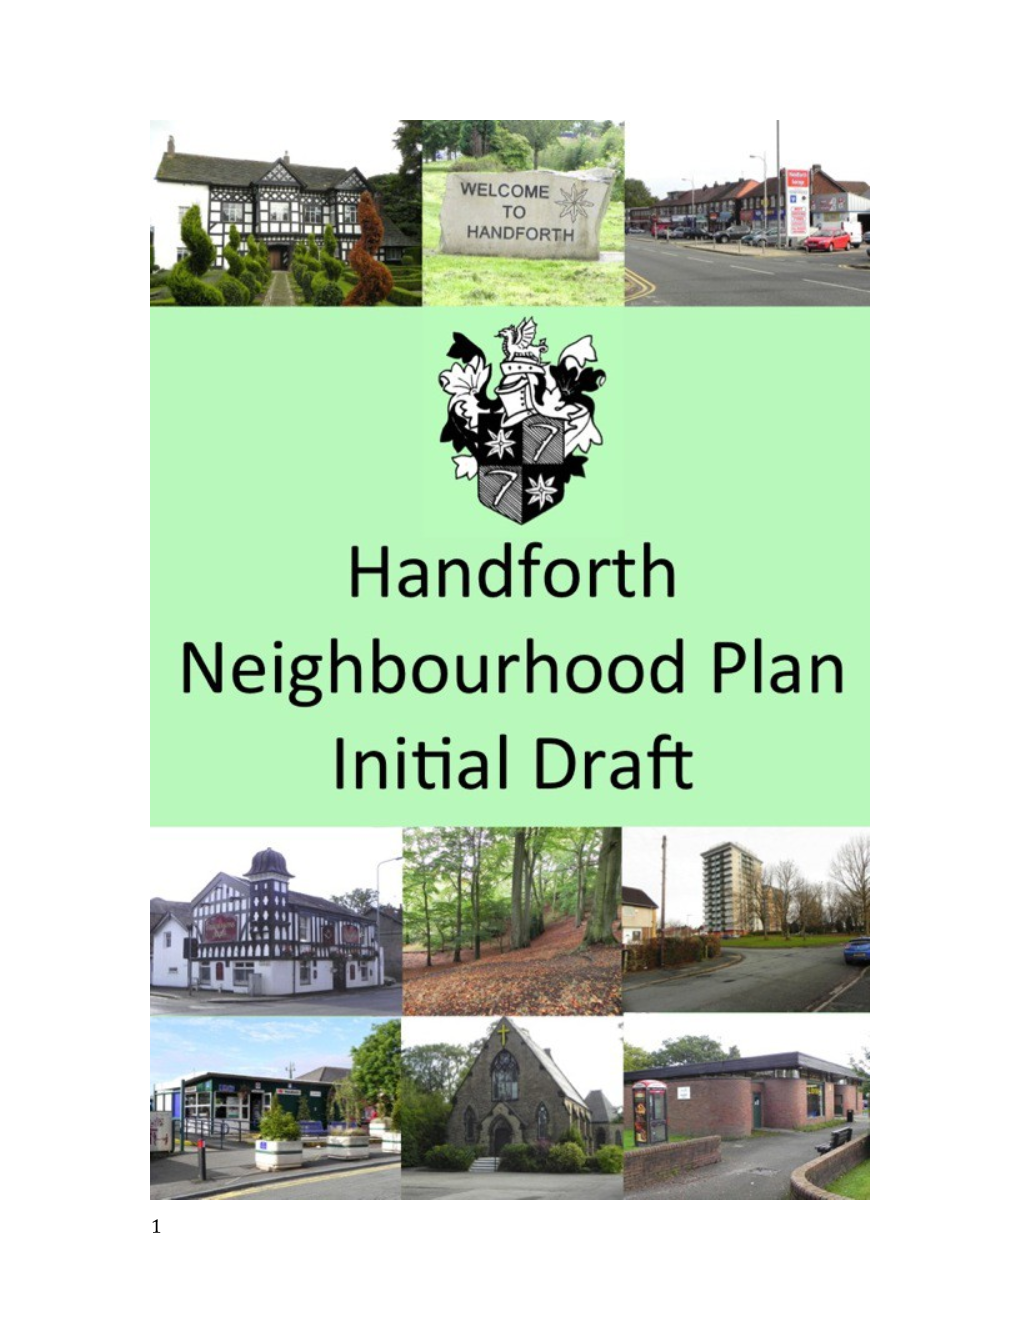 1.3How Does the Neighbourhood Plan Fit Into the Planning System?